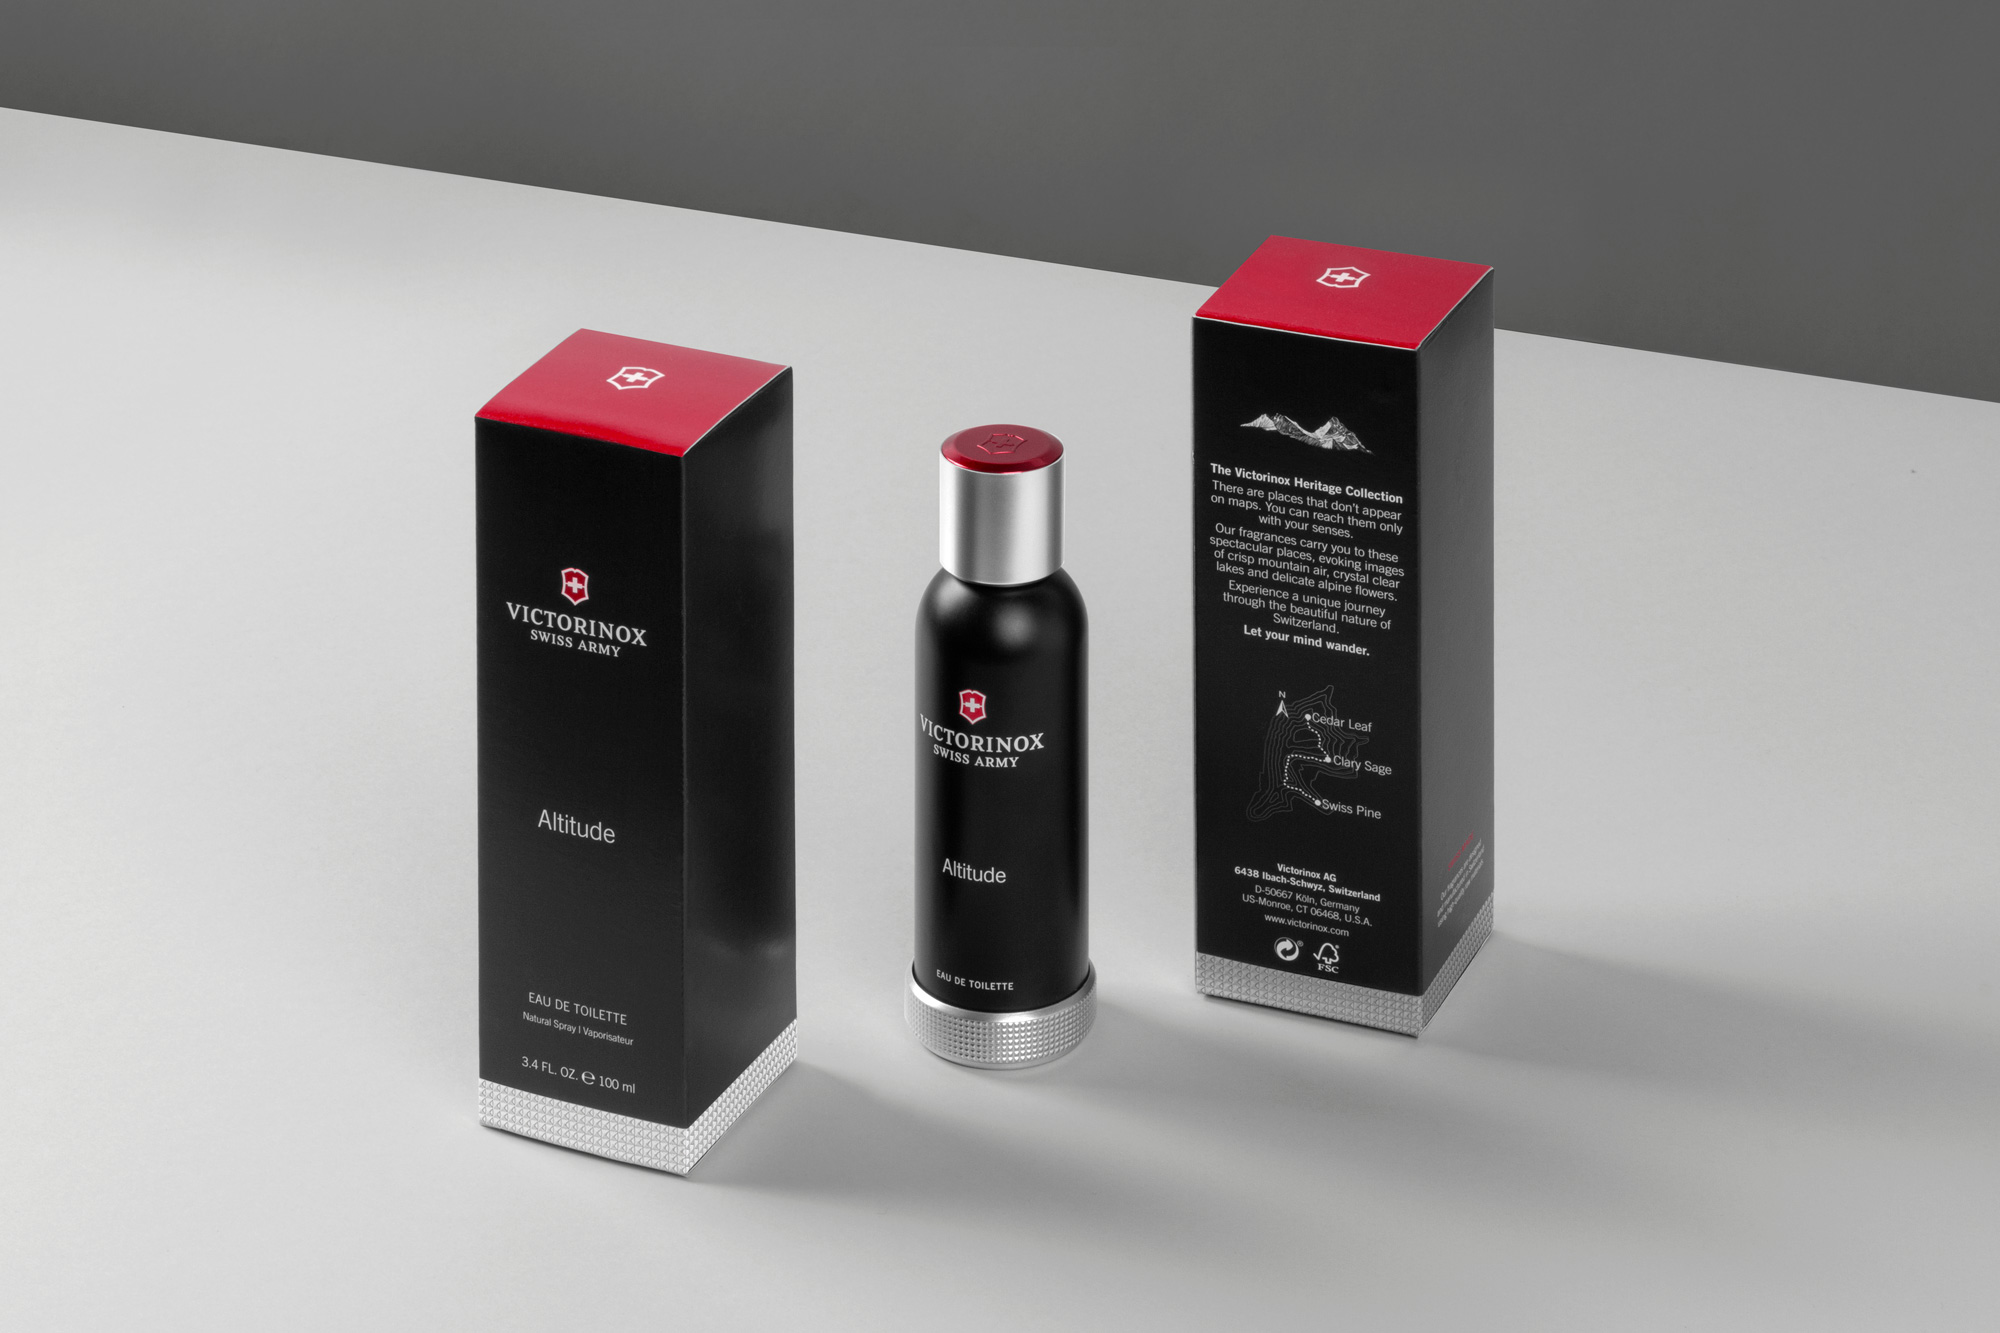 Victorinox Altitude perfume and packaging design